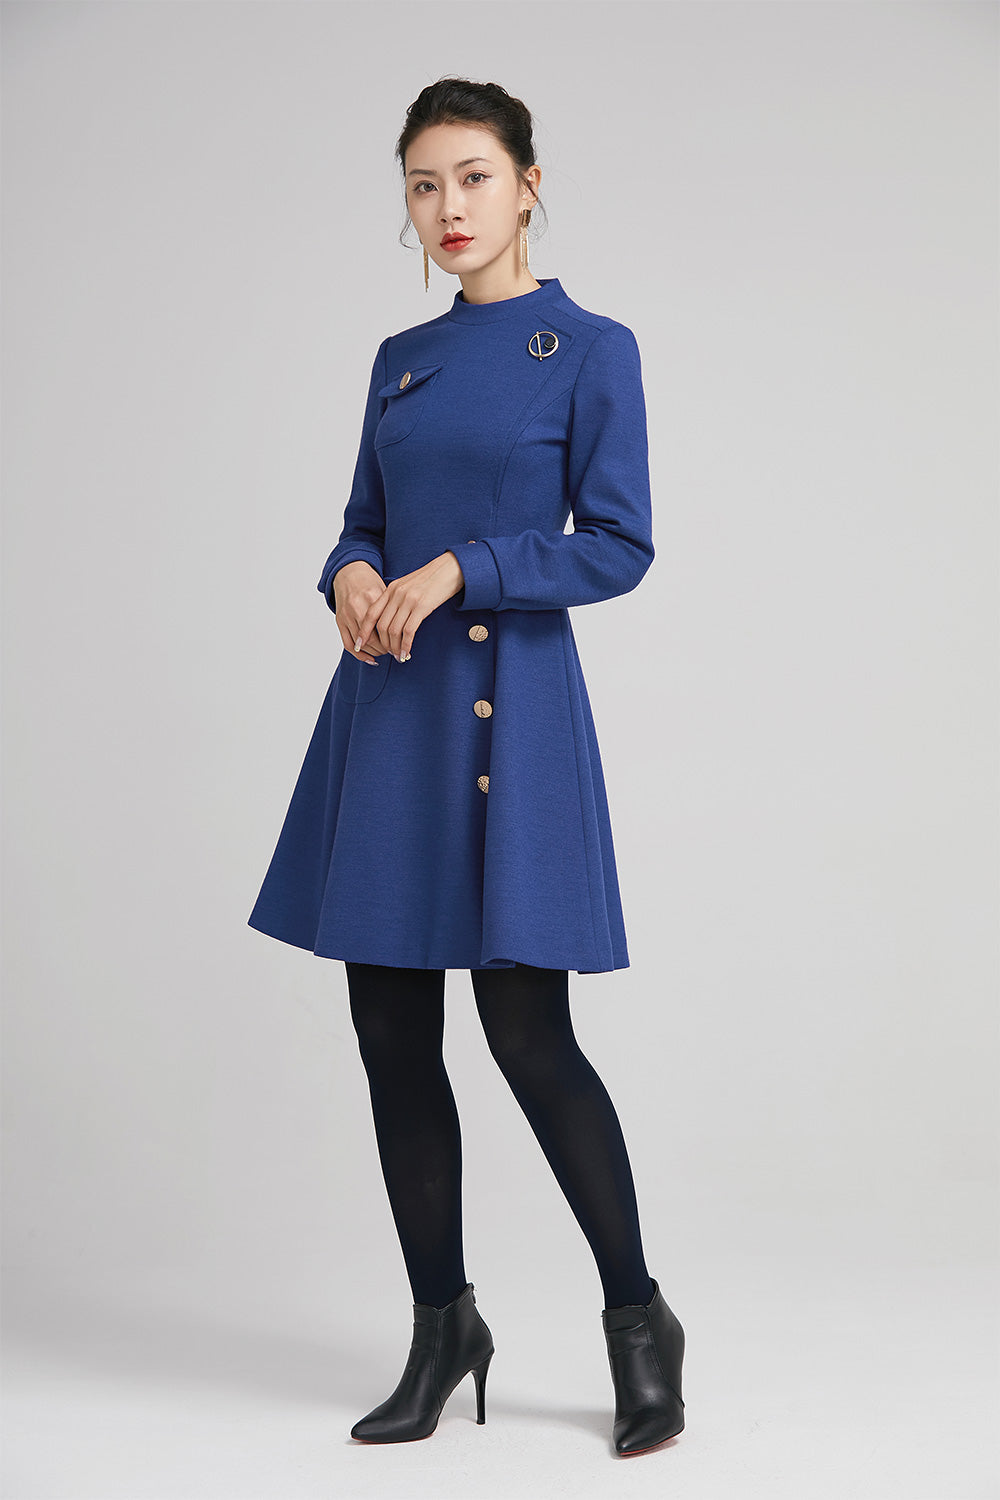 winter short wool dress with pockets and long sleeves 2238